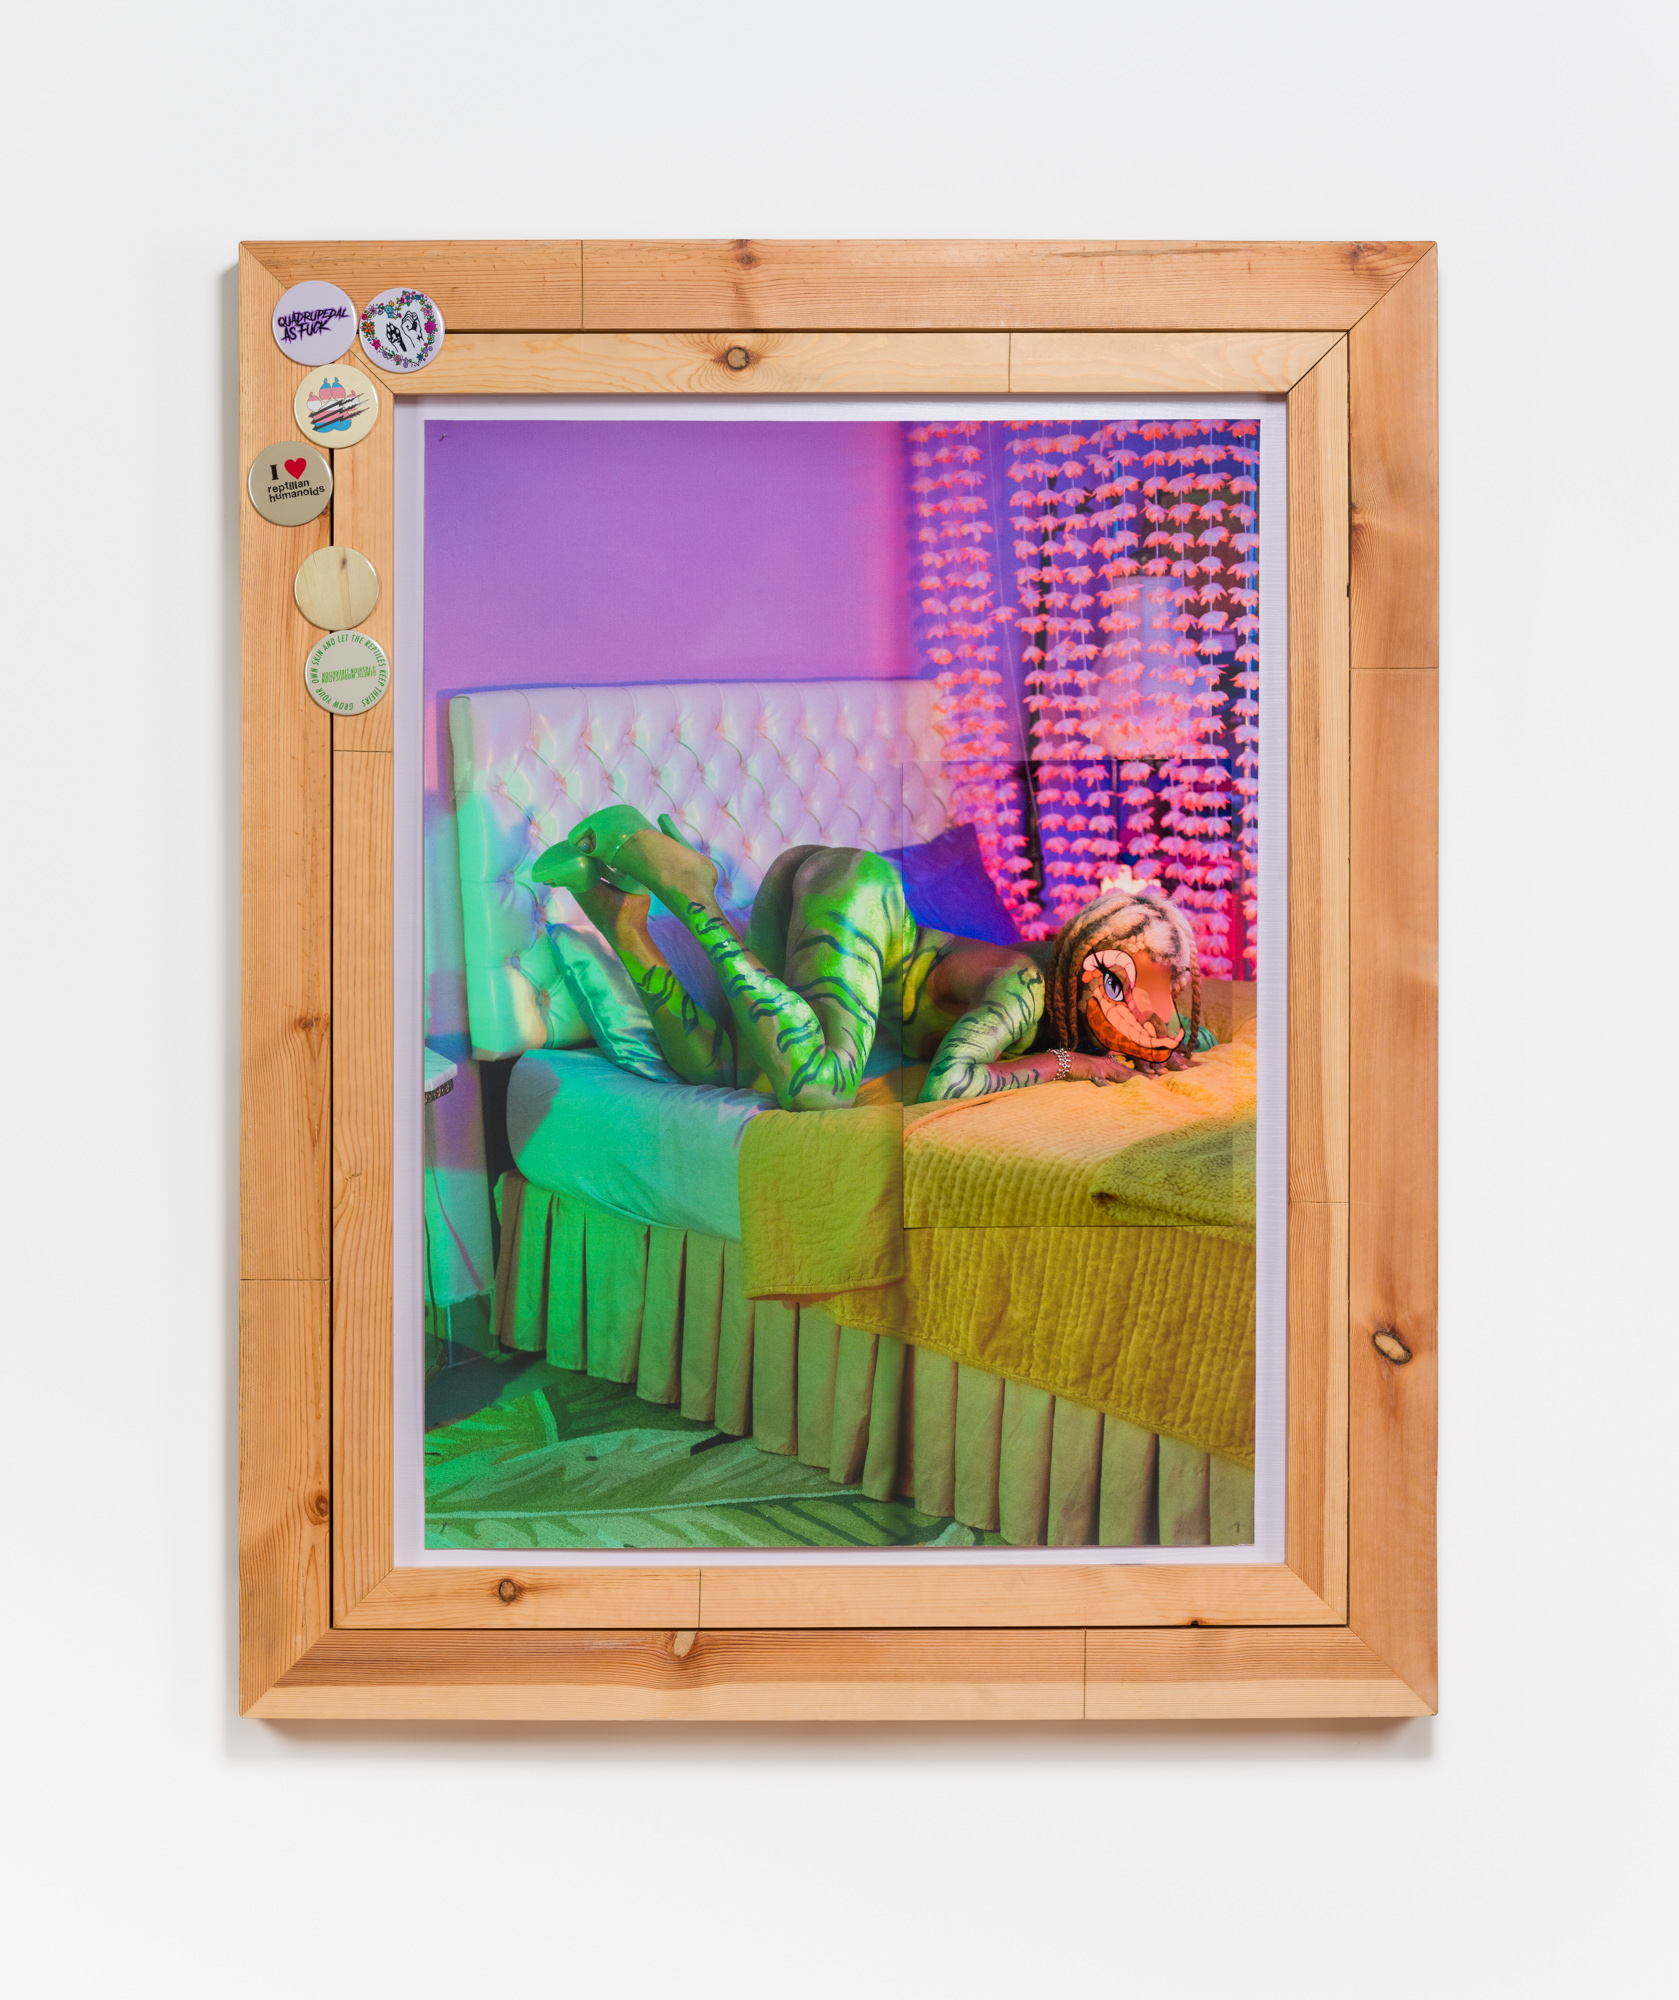 Juliana Huxtable, TBT, 2019 12 colour archival ink on linen, collage, bespoke badges in artist frame 53 7/8 × 42 1/8 × 2 3/8 inches